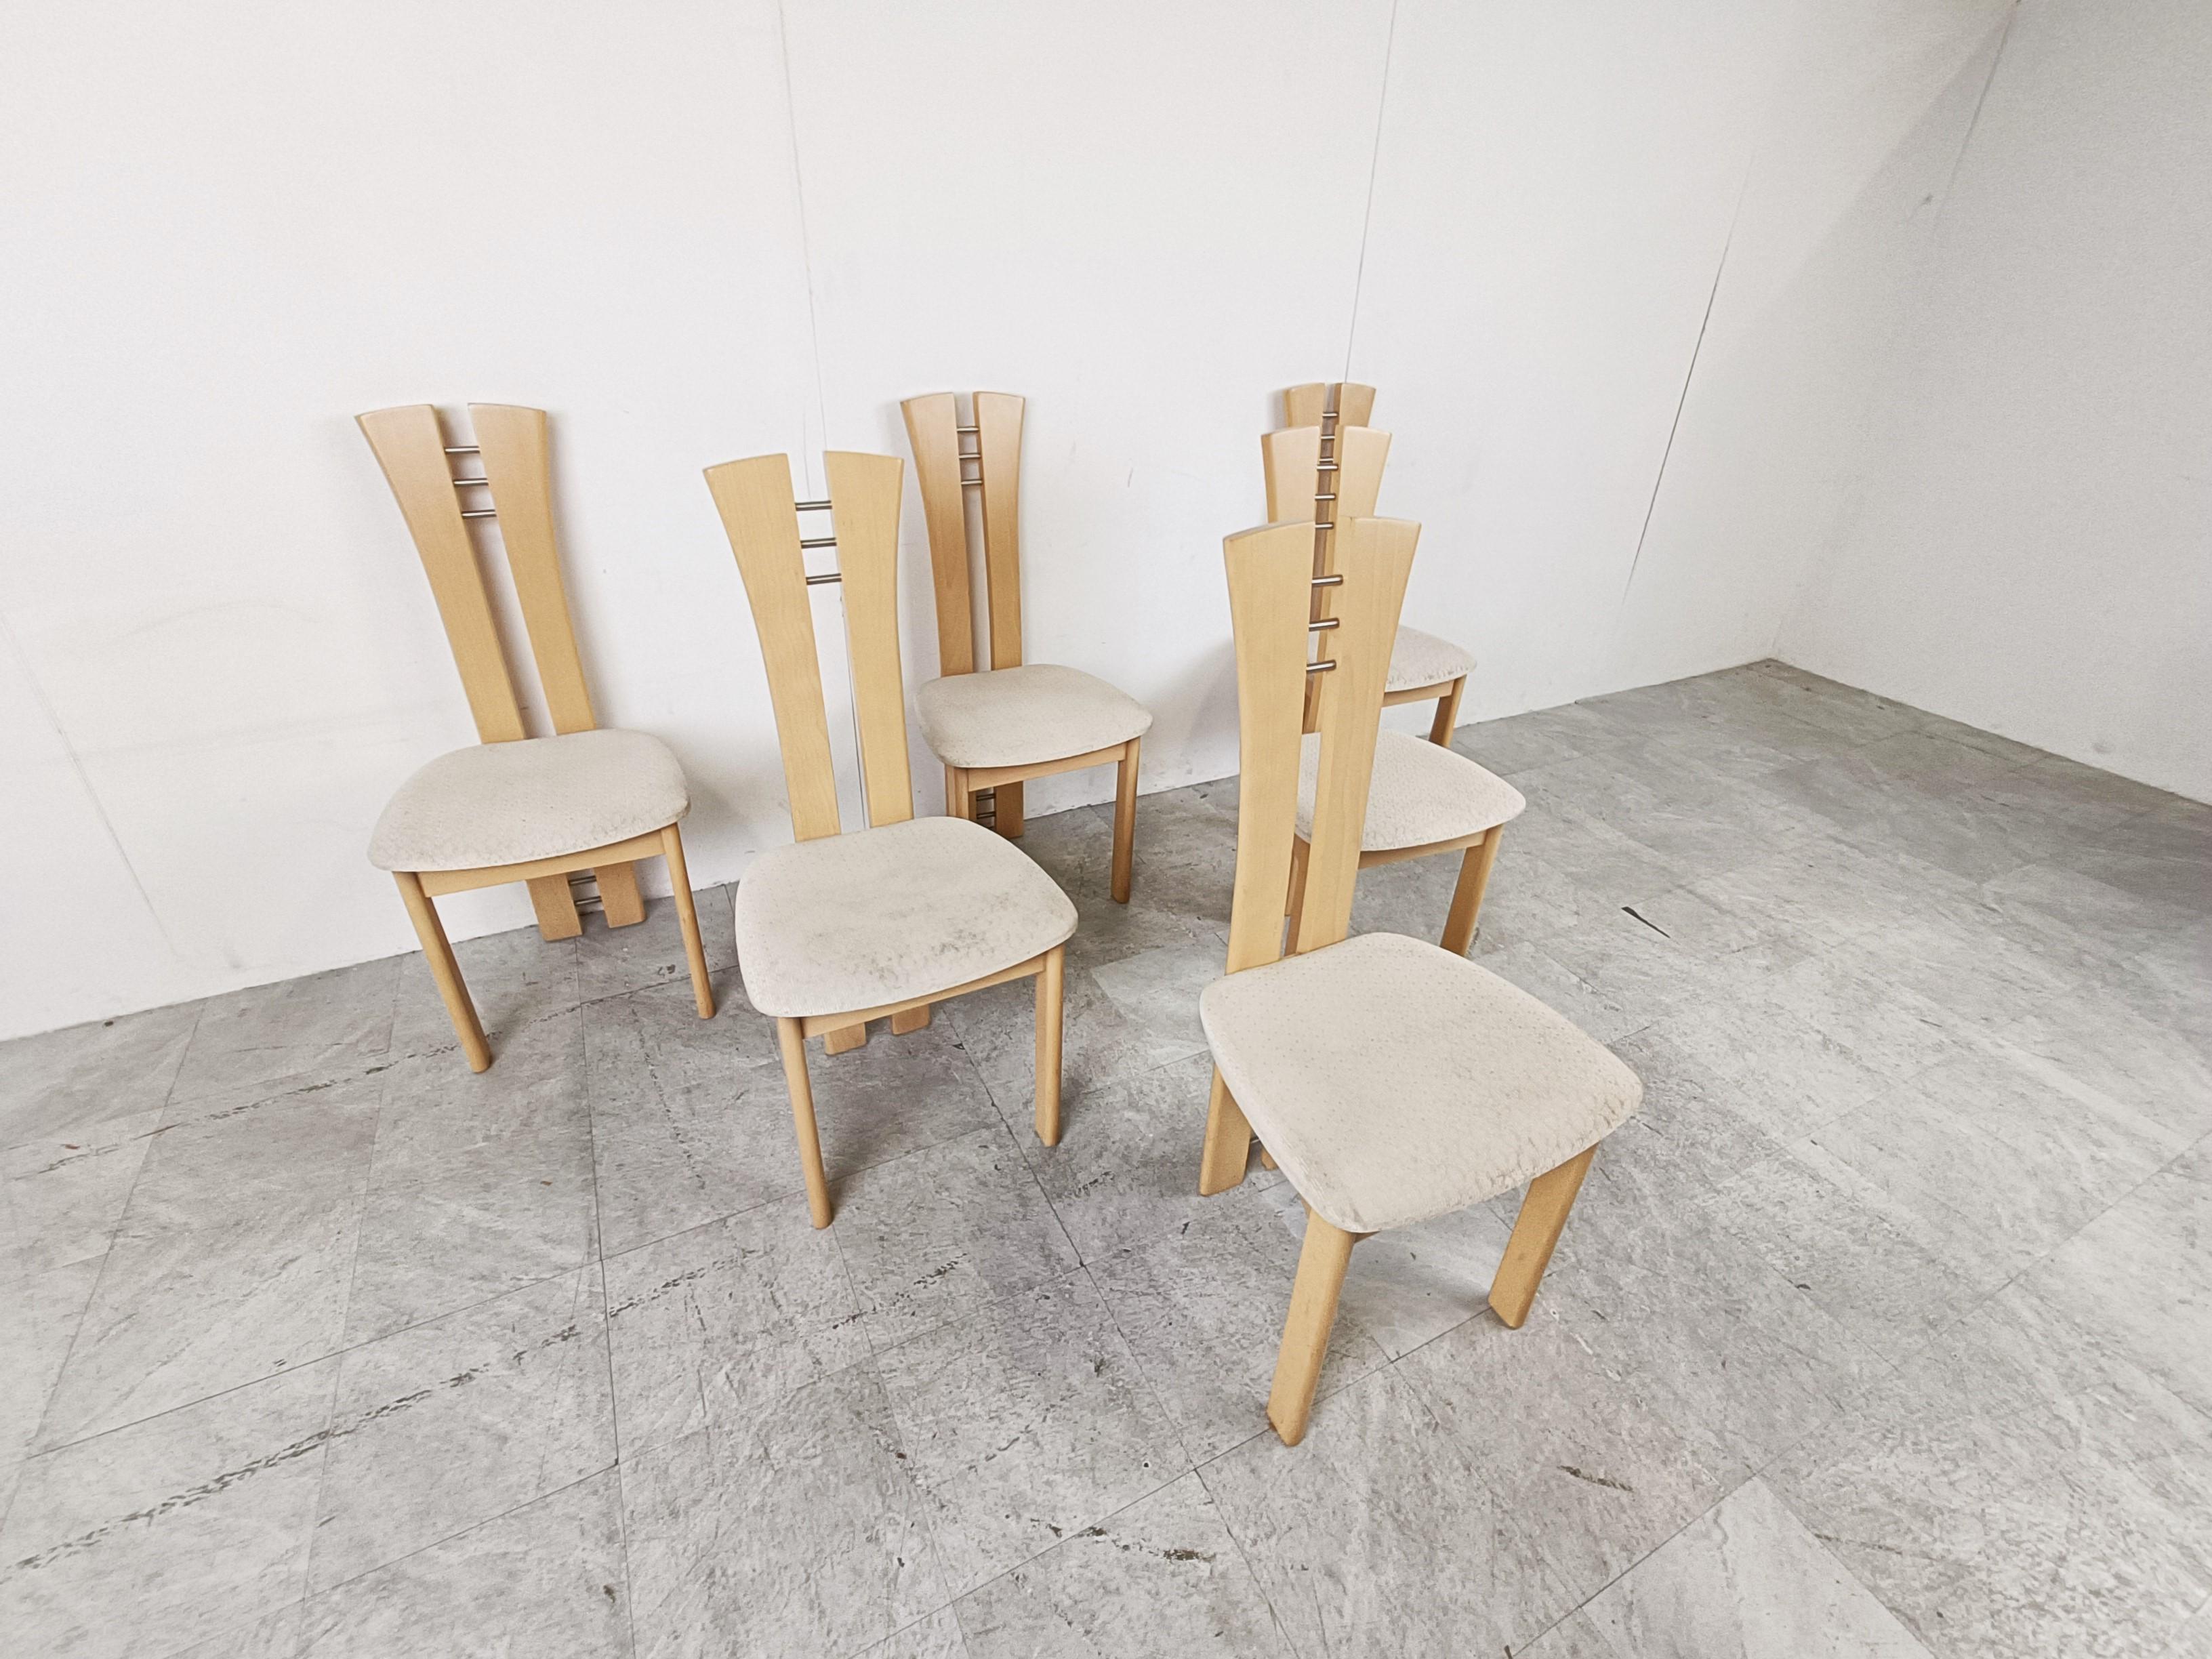 Belgian Set of 6 Wooden High Back Dining Chairs, 1990s For Sale